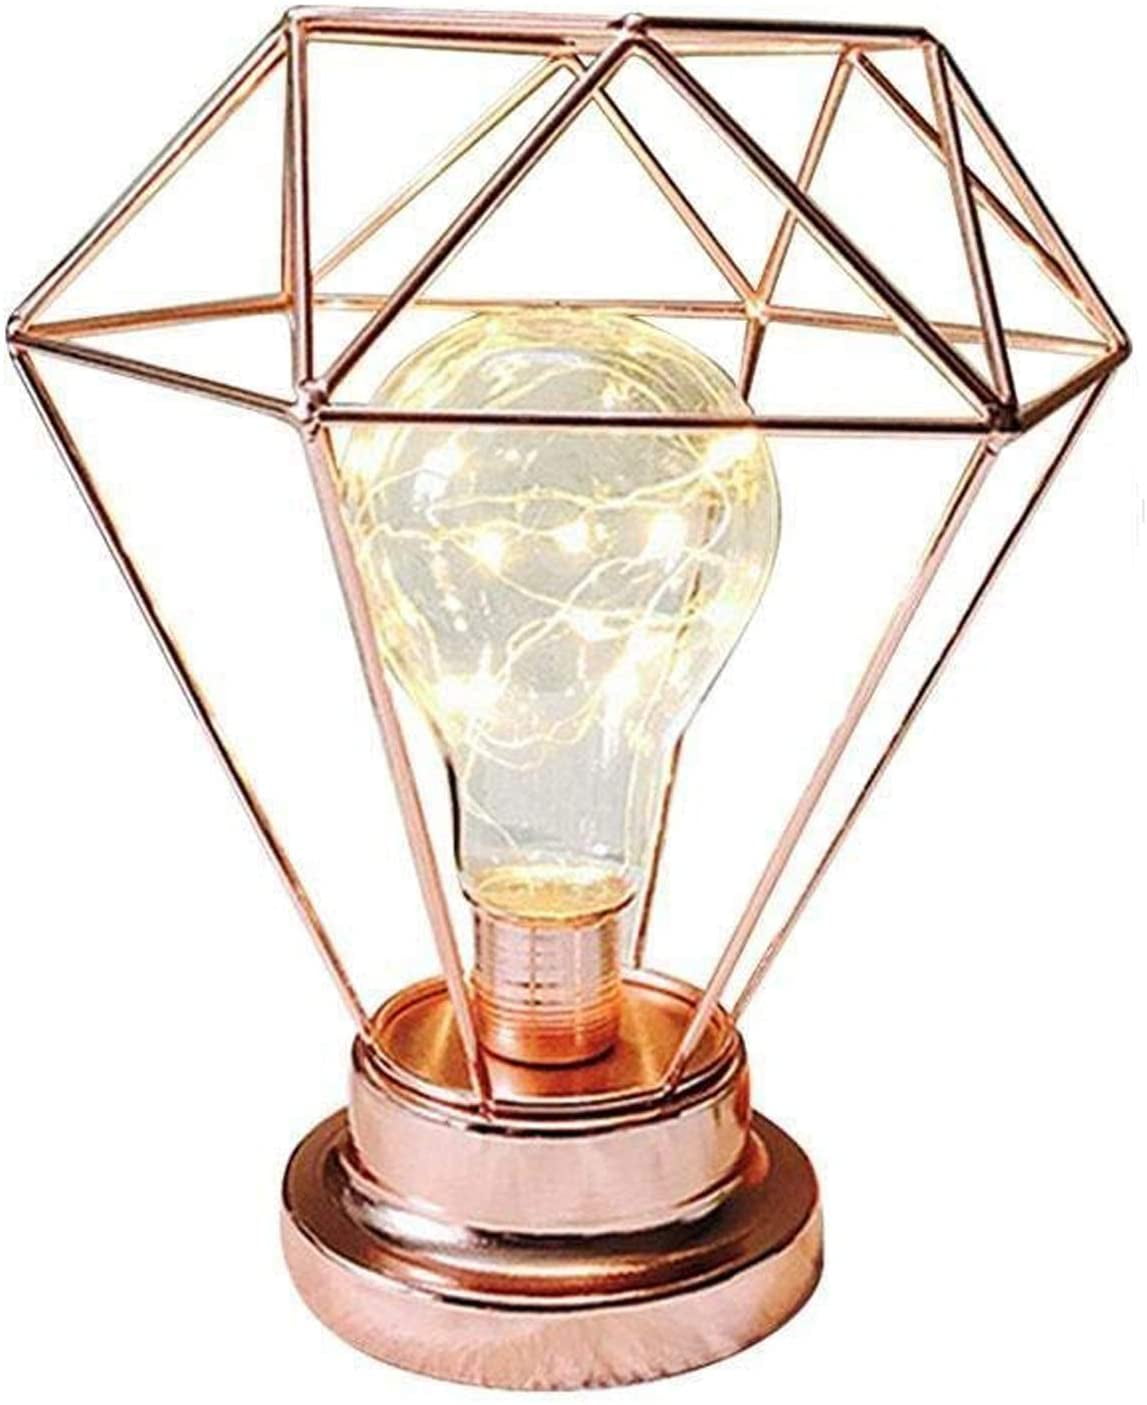 Diamond Shape Bedside Lamp Floor Lamp, Battery Operated Nordic Style